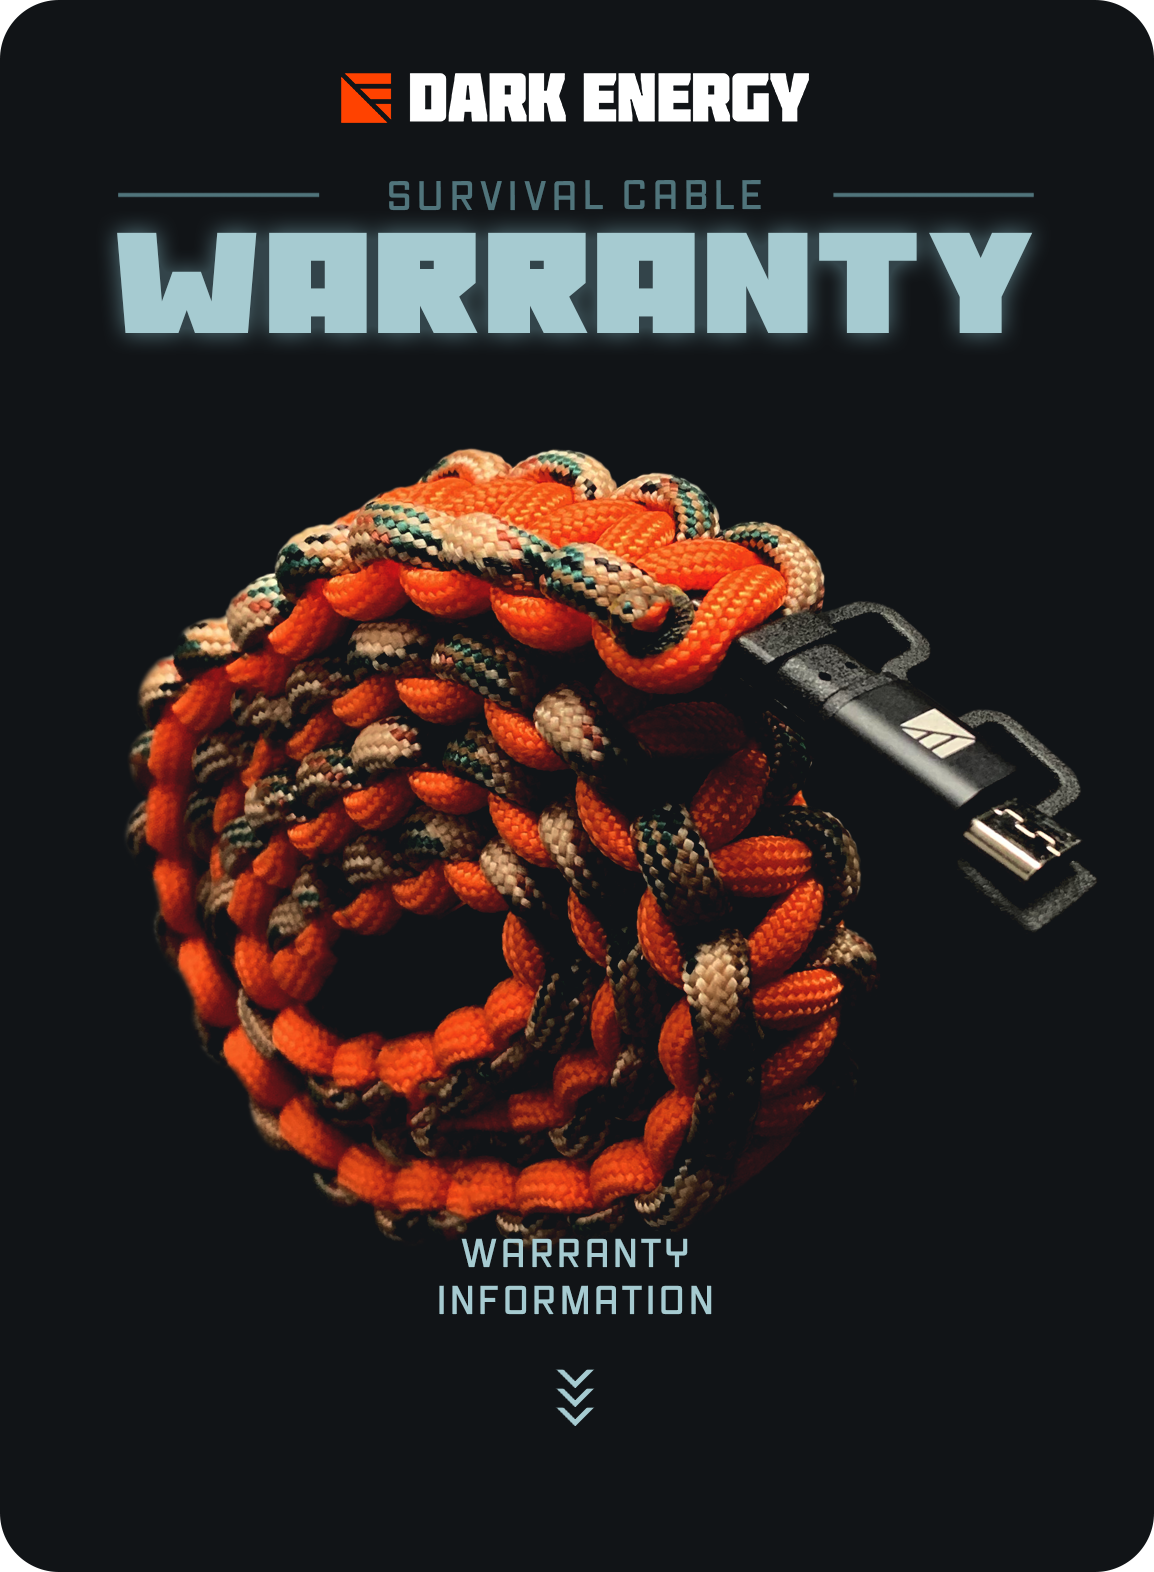 Warranty info for the Survival Cable.